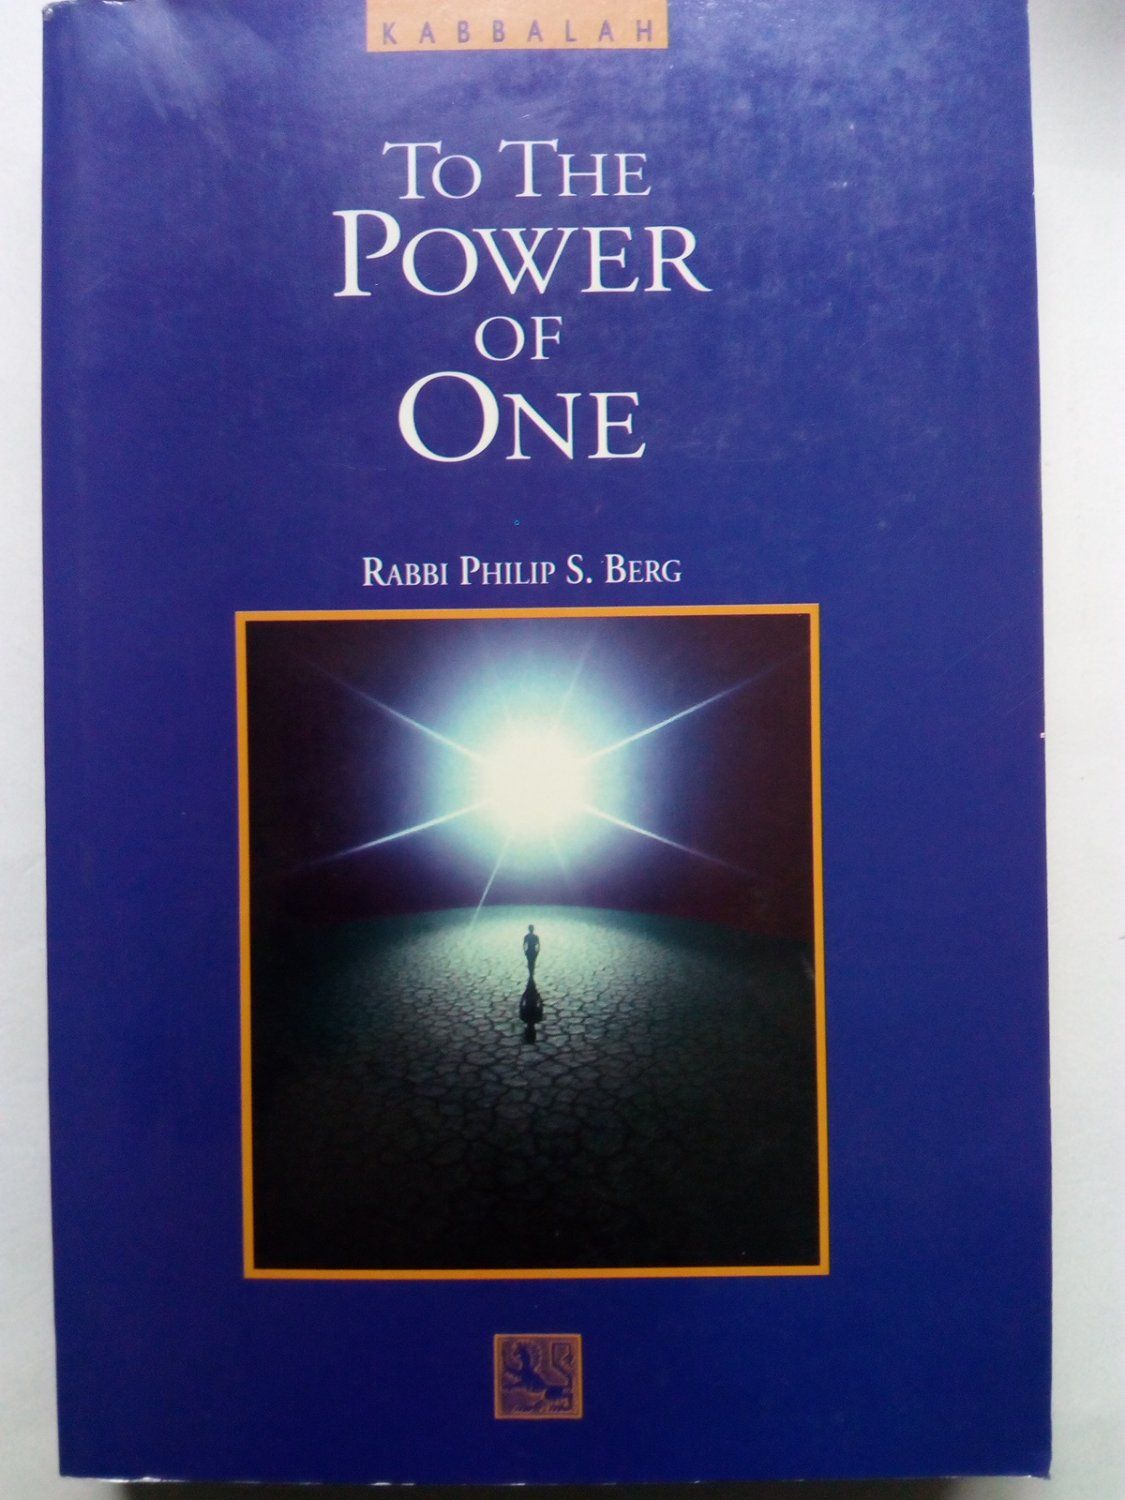 To the Power of One - Philip S. Berg